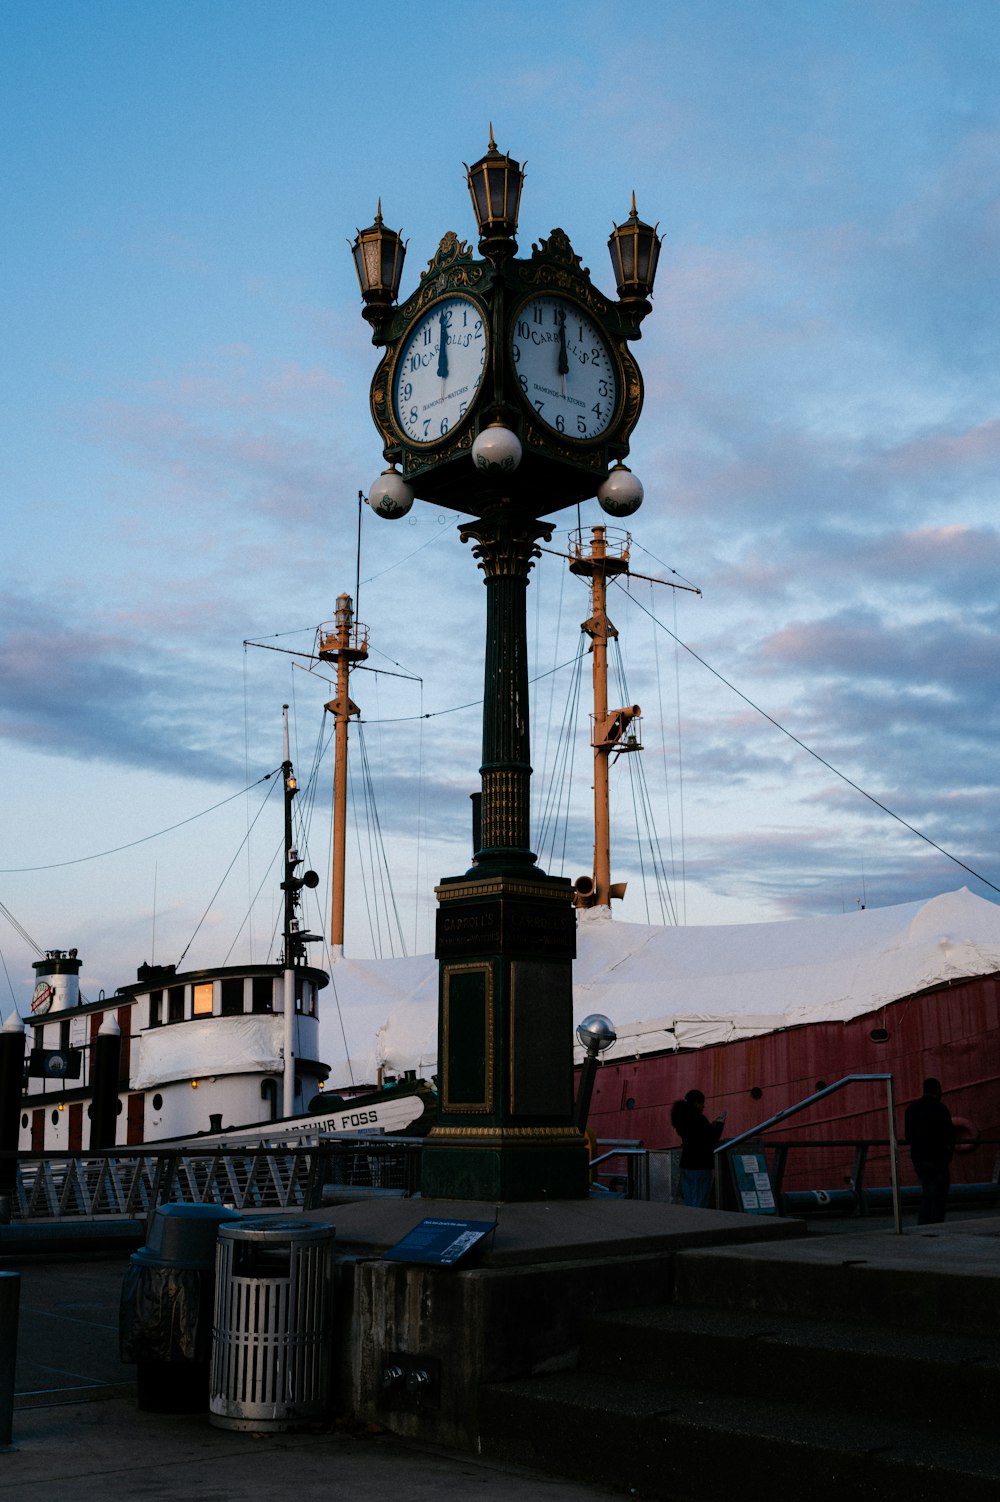 a clock on a post in front of a boat